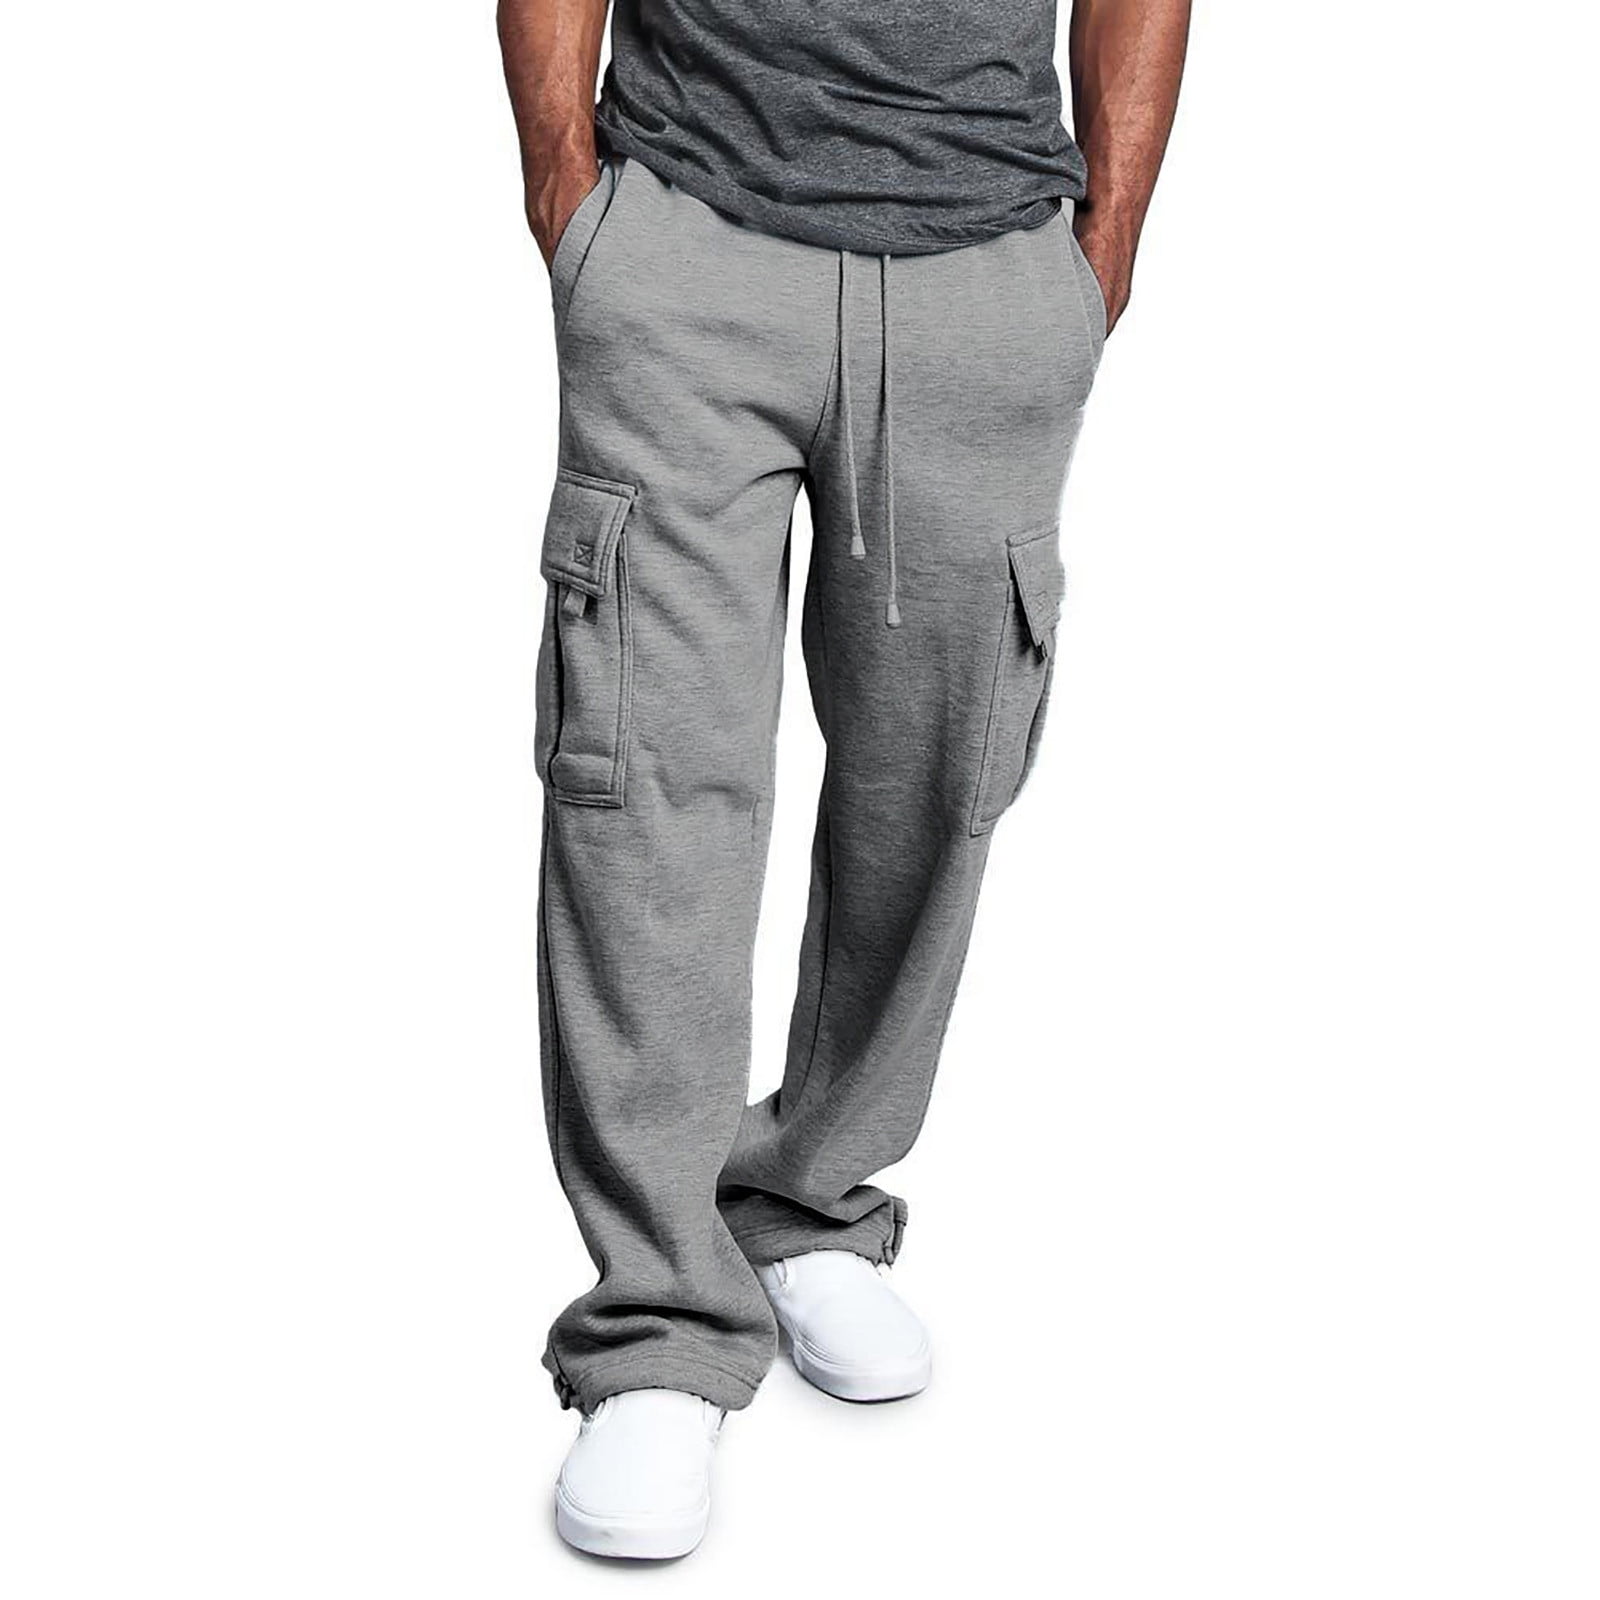 Men Fleece Lined Thermal Thick Trousers Athletic Pants Loose